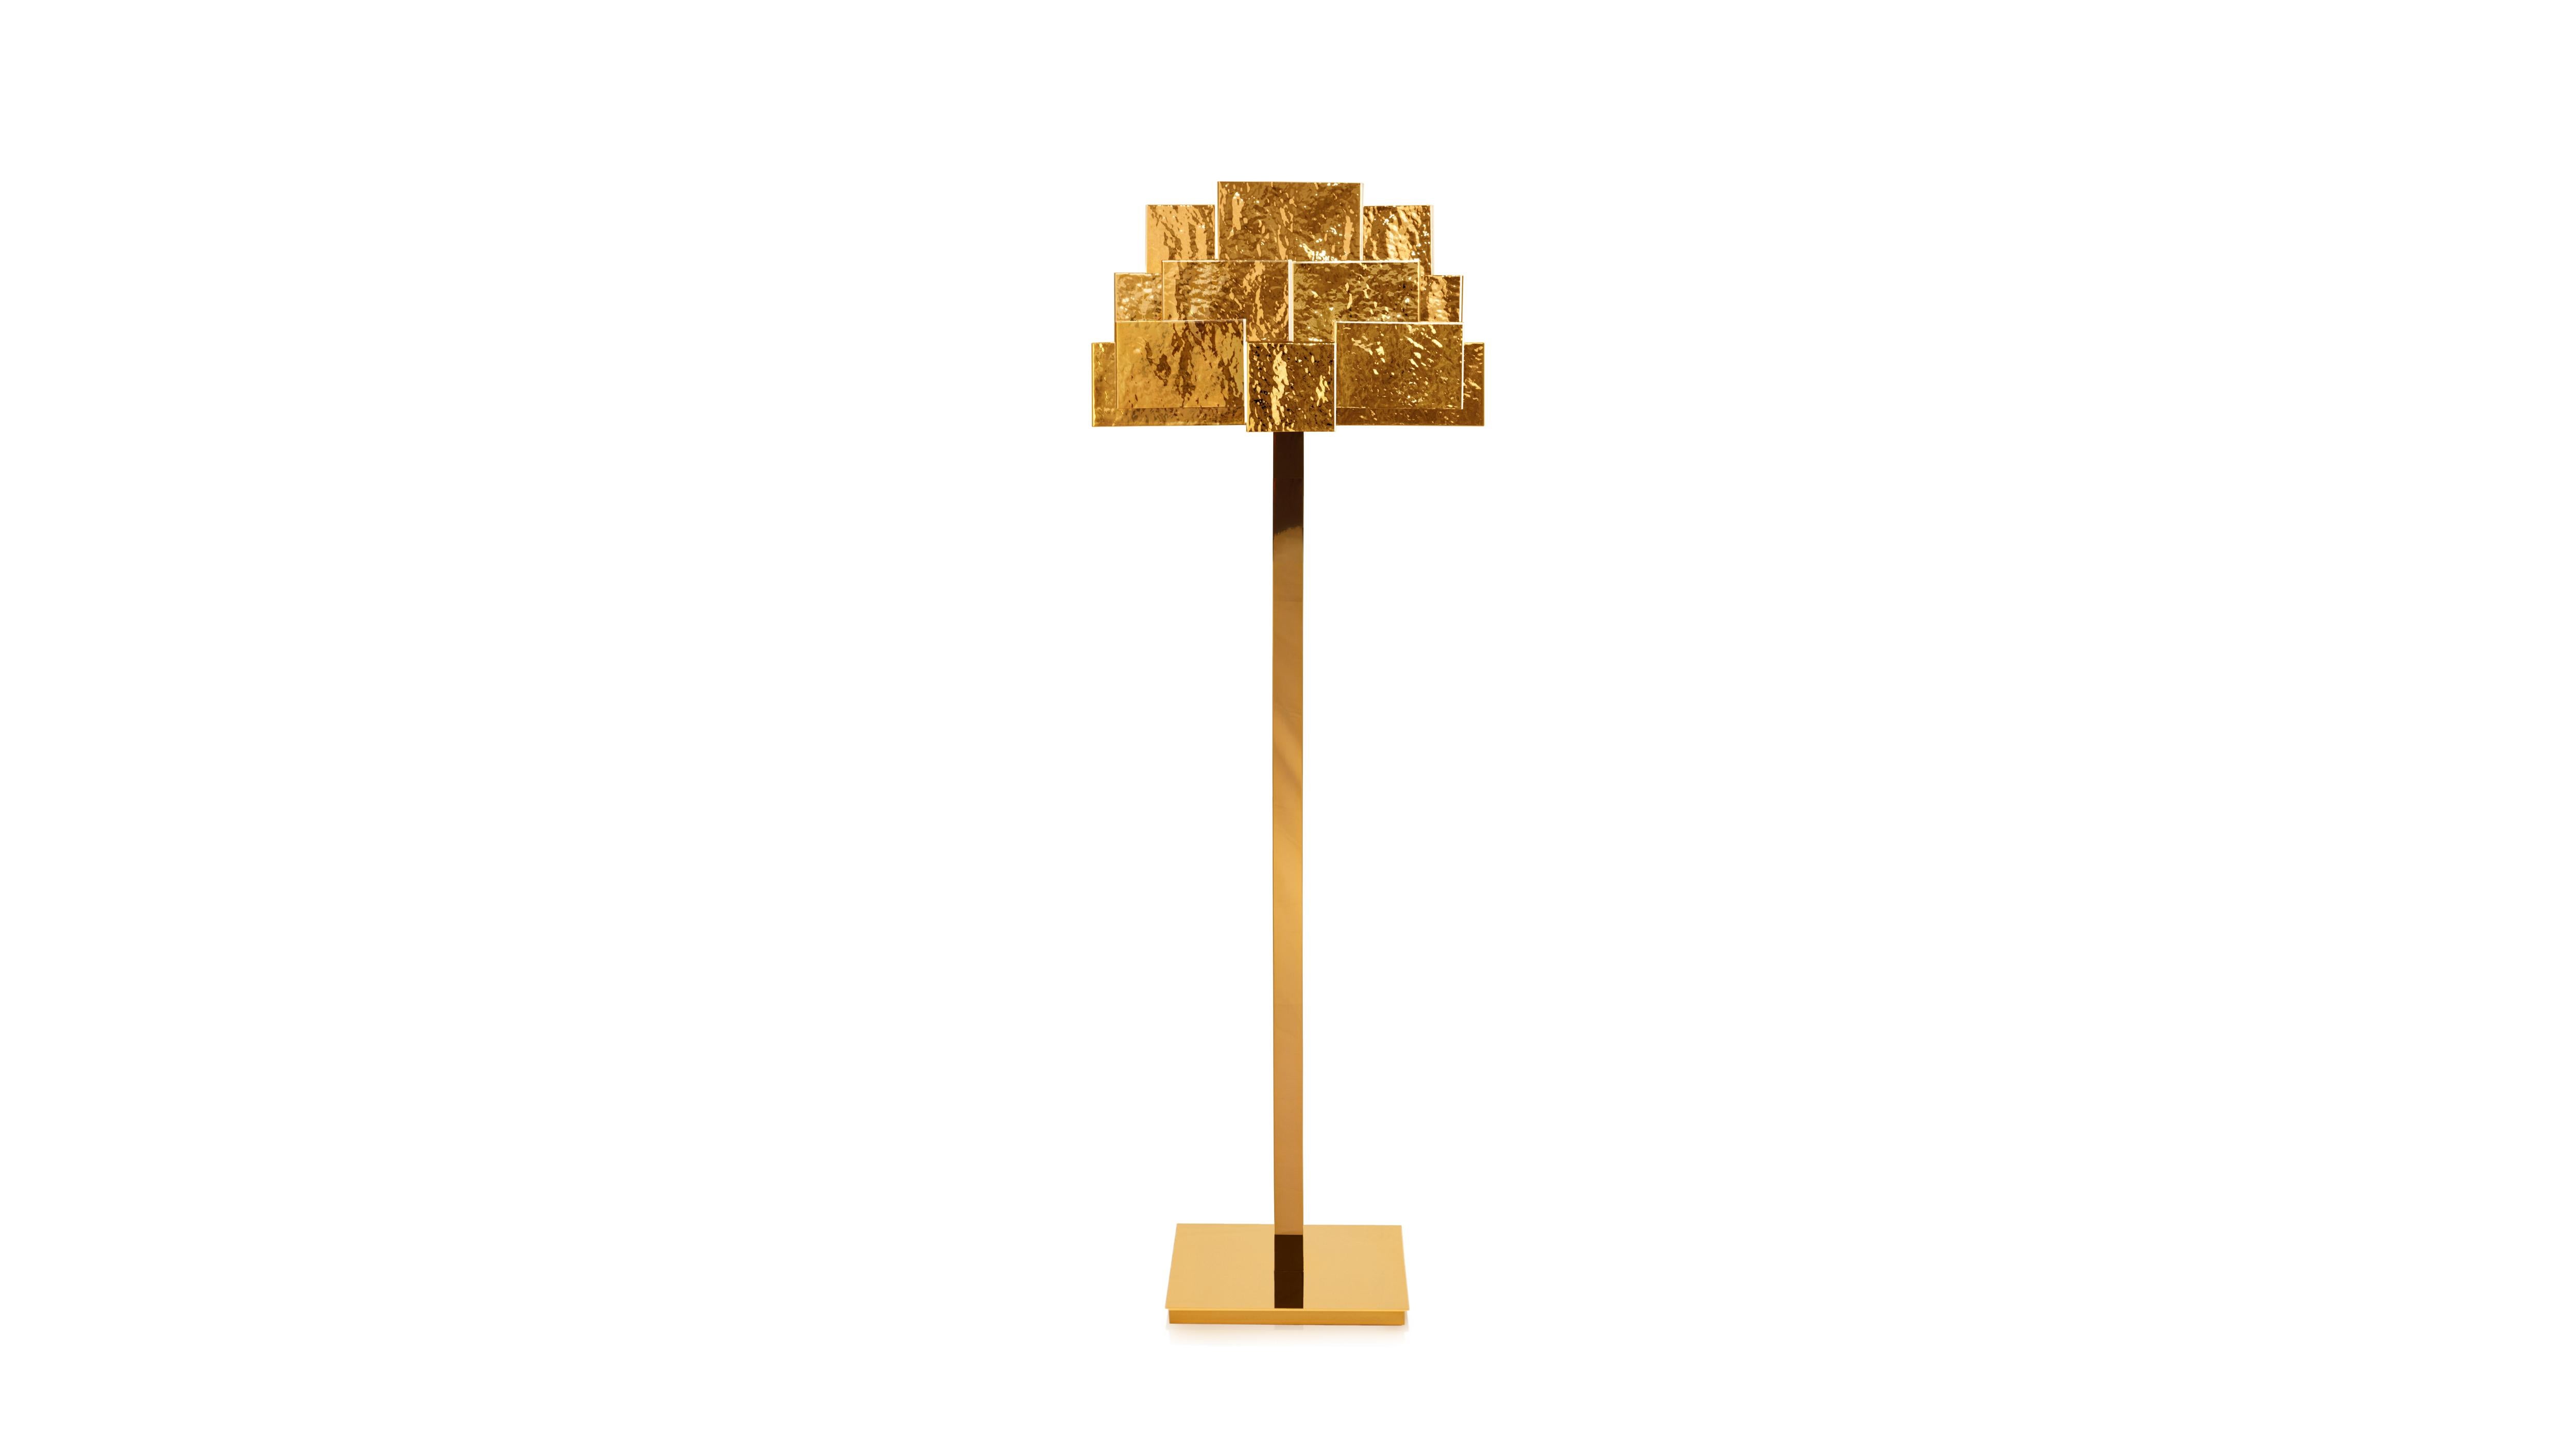 Inspiring Trees Hammered Golden Brass Floor Lamp by InsidherLand
Dimensions: D 42 x W 53 x H 160 cm.
Materials: hammered brass with golden bath, polished brass with golden bath.
24 kg.
Available in other metals.

Inspiring Trees is the essence of a